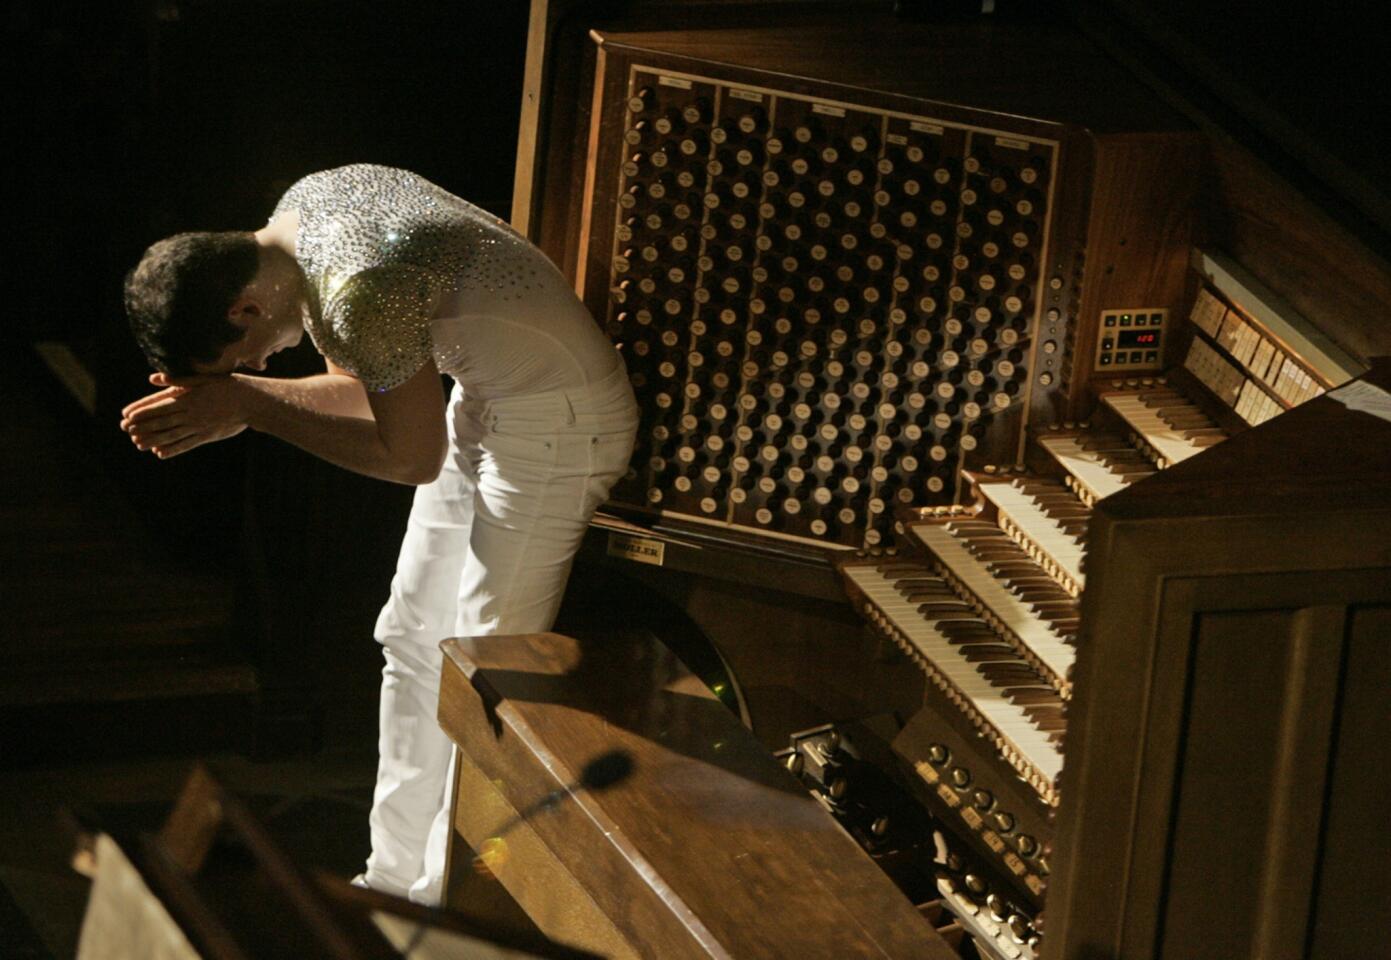 Like Liberace, Carpenter takes style and entertainment seriously. But he also takes the organ seriously. Here, he takes a bow during an organ concert at the First Congregational Church in Los Angeles.